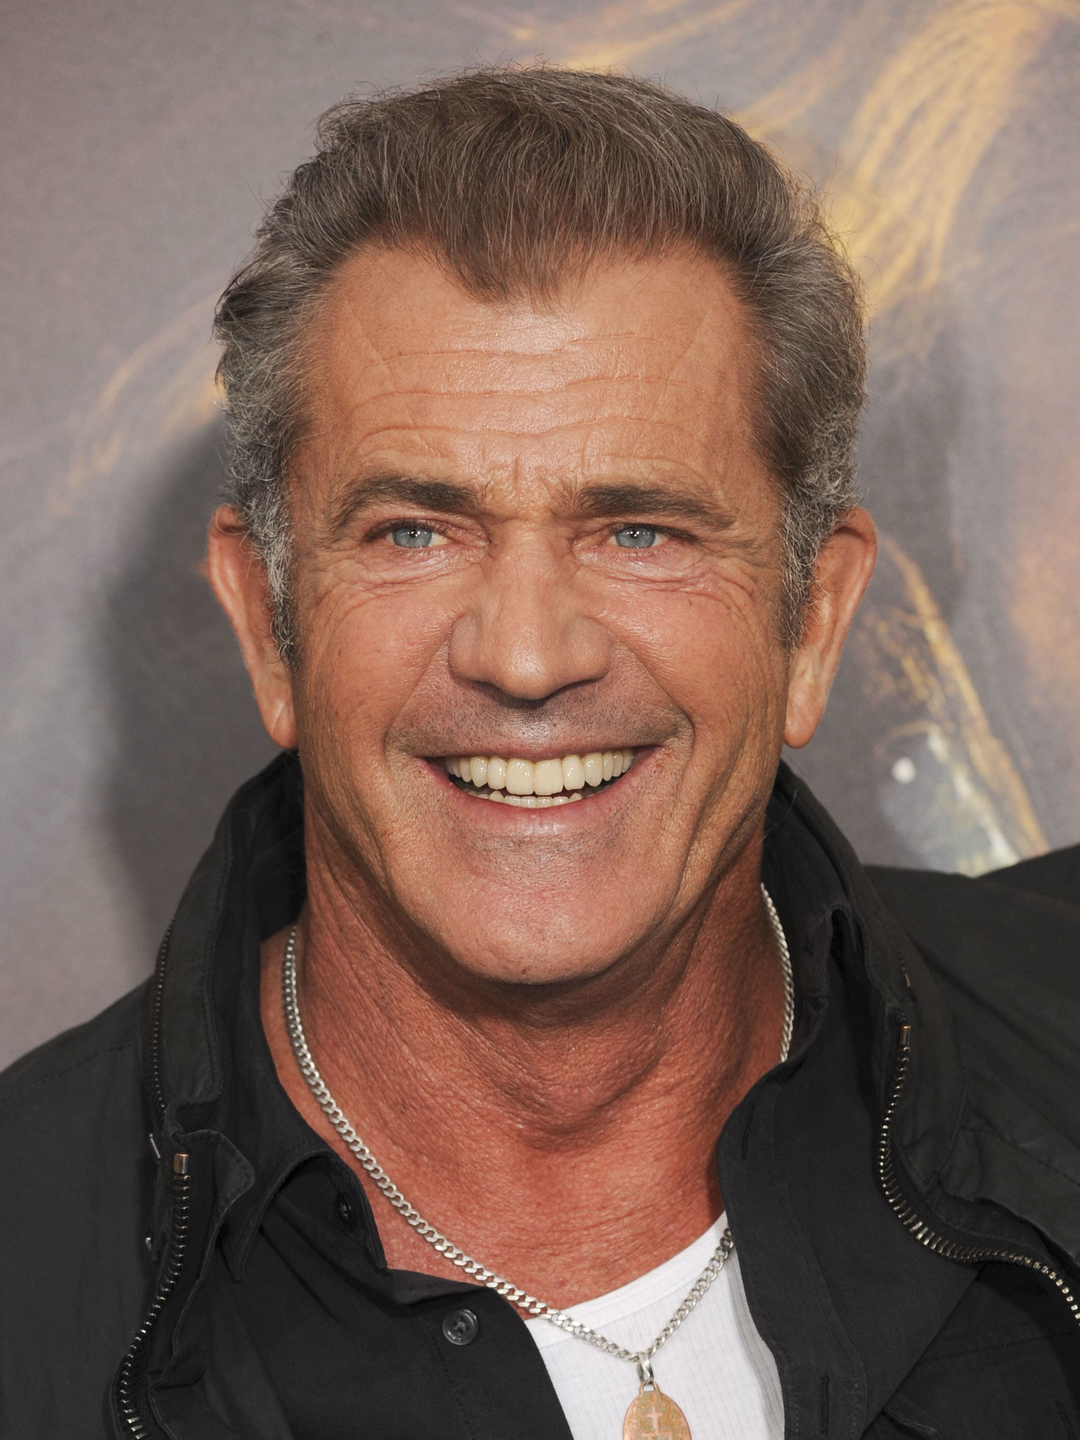 Mel Gibson personal traits